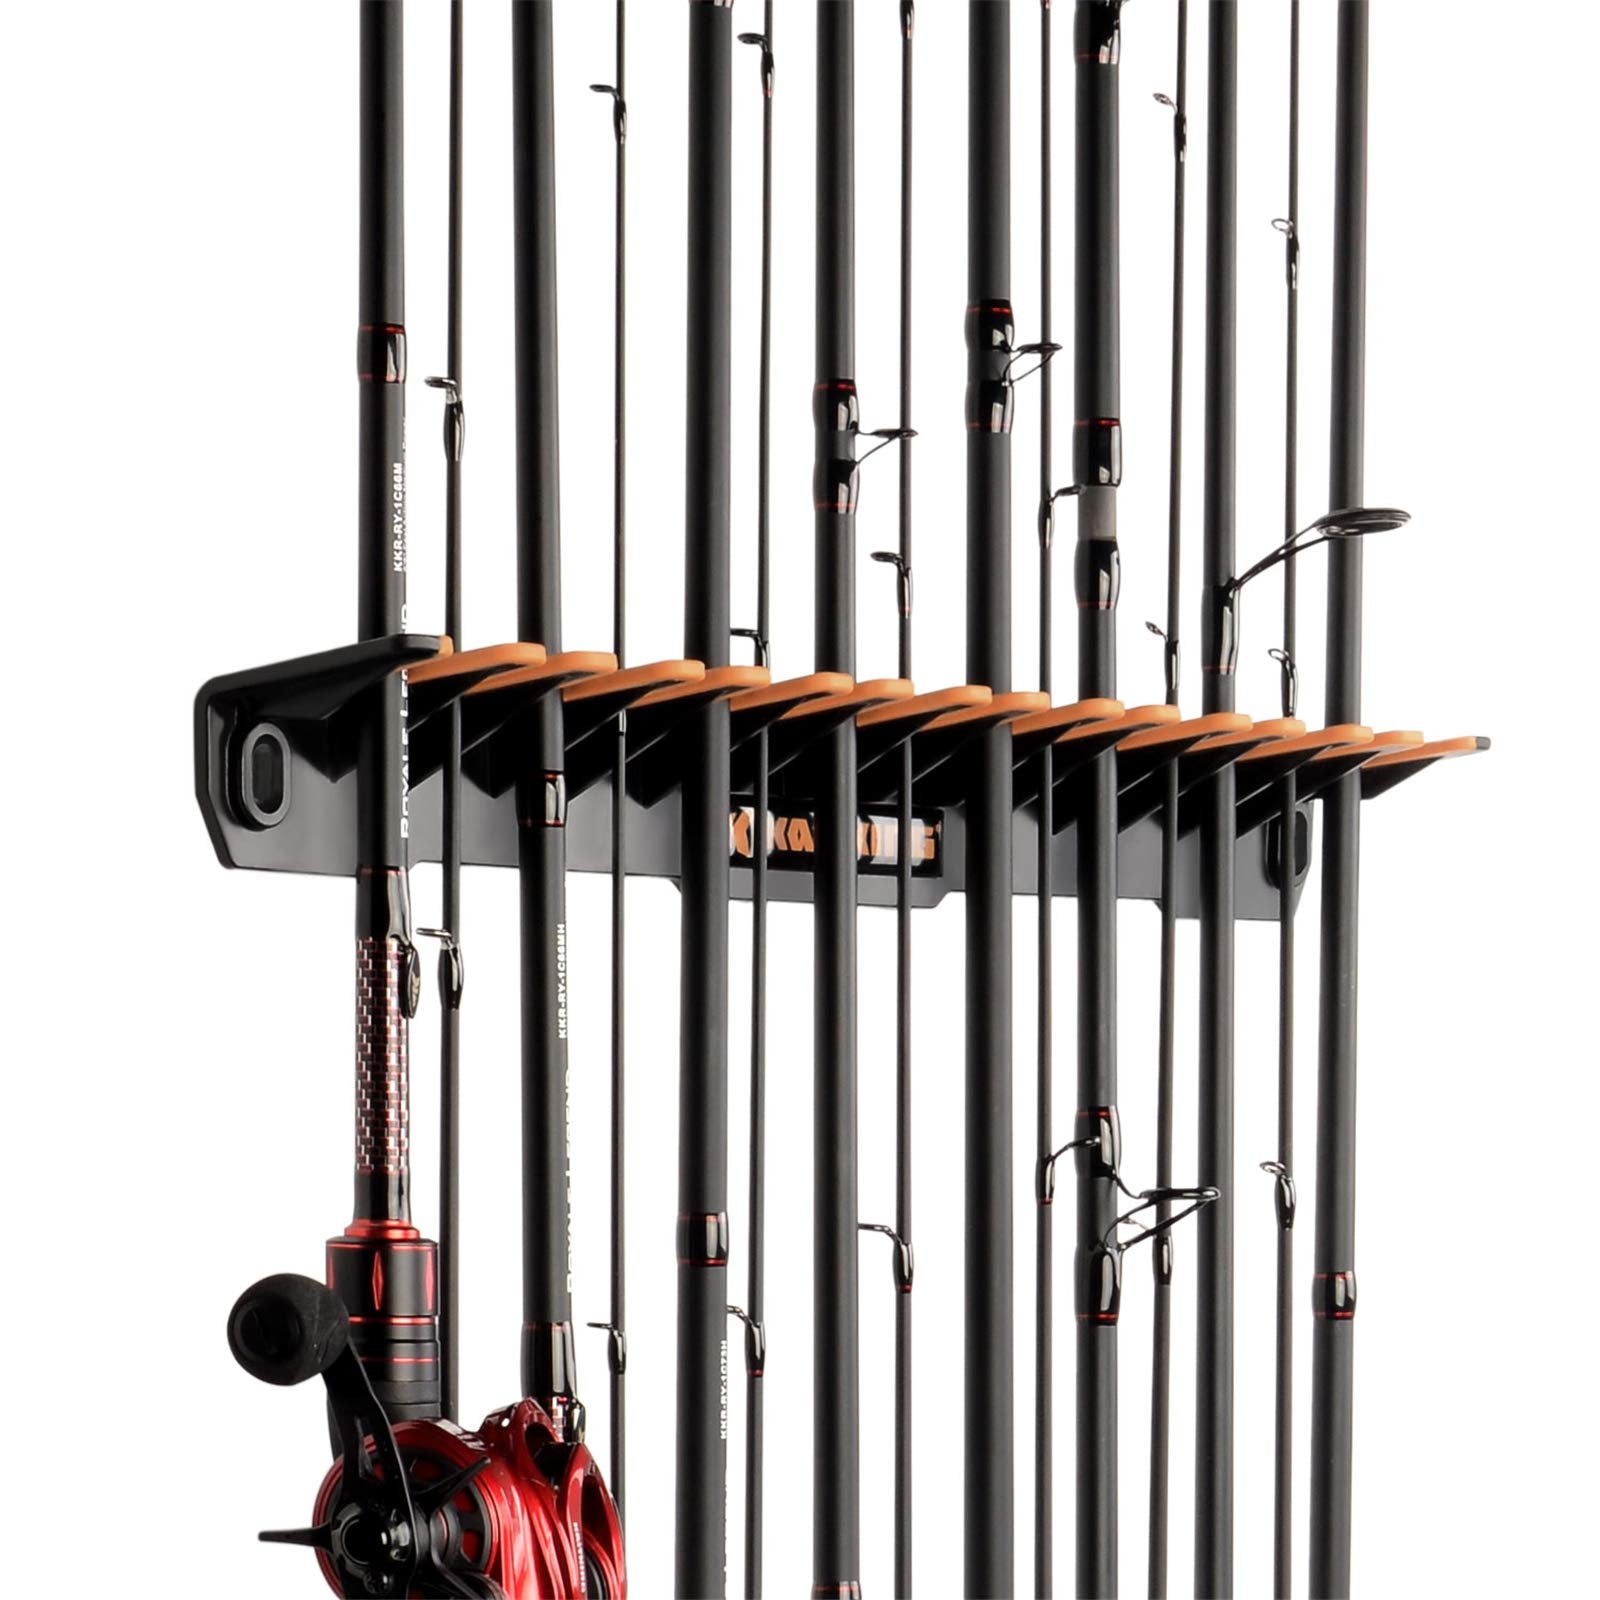 KastKing Patented V15 Vertical Fishing Rod Holder – Wall Mounted Fishing  Rod Rack, Store 15 Rods or Fishing Rod Combos in 18 Inches, Great Fishing  Pole Holder and Rack